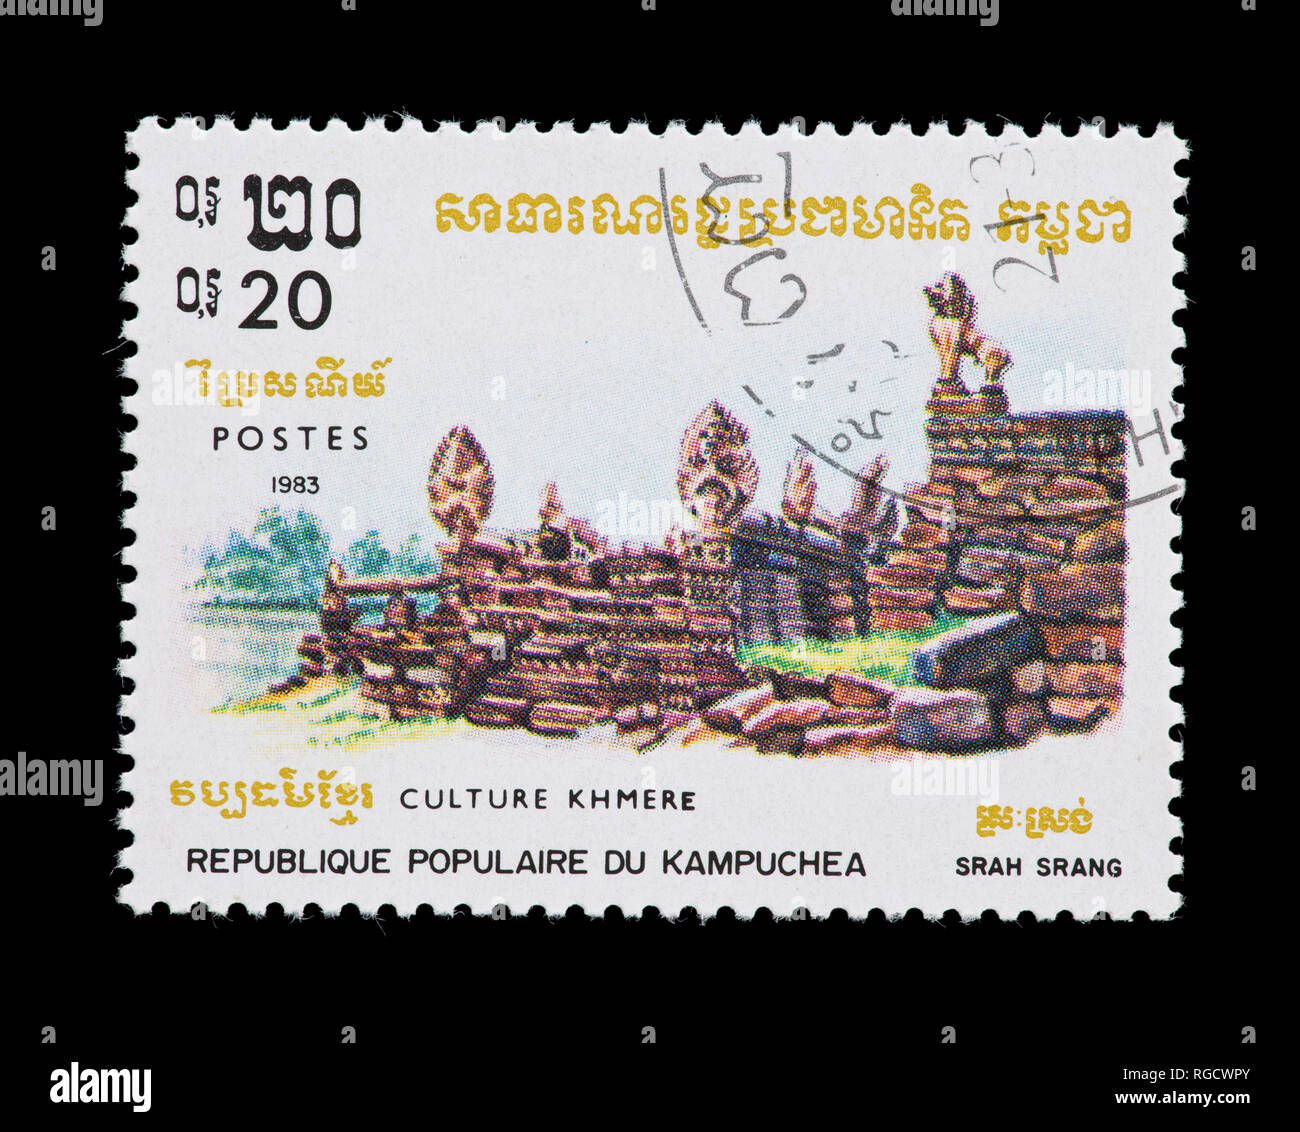 Postage stamp from Cambodia (Kampuchea) depicting the ruins of Srah Srang, issued for Khmer culture Stock Photo